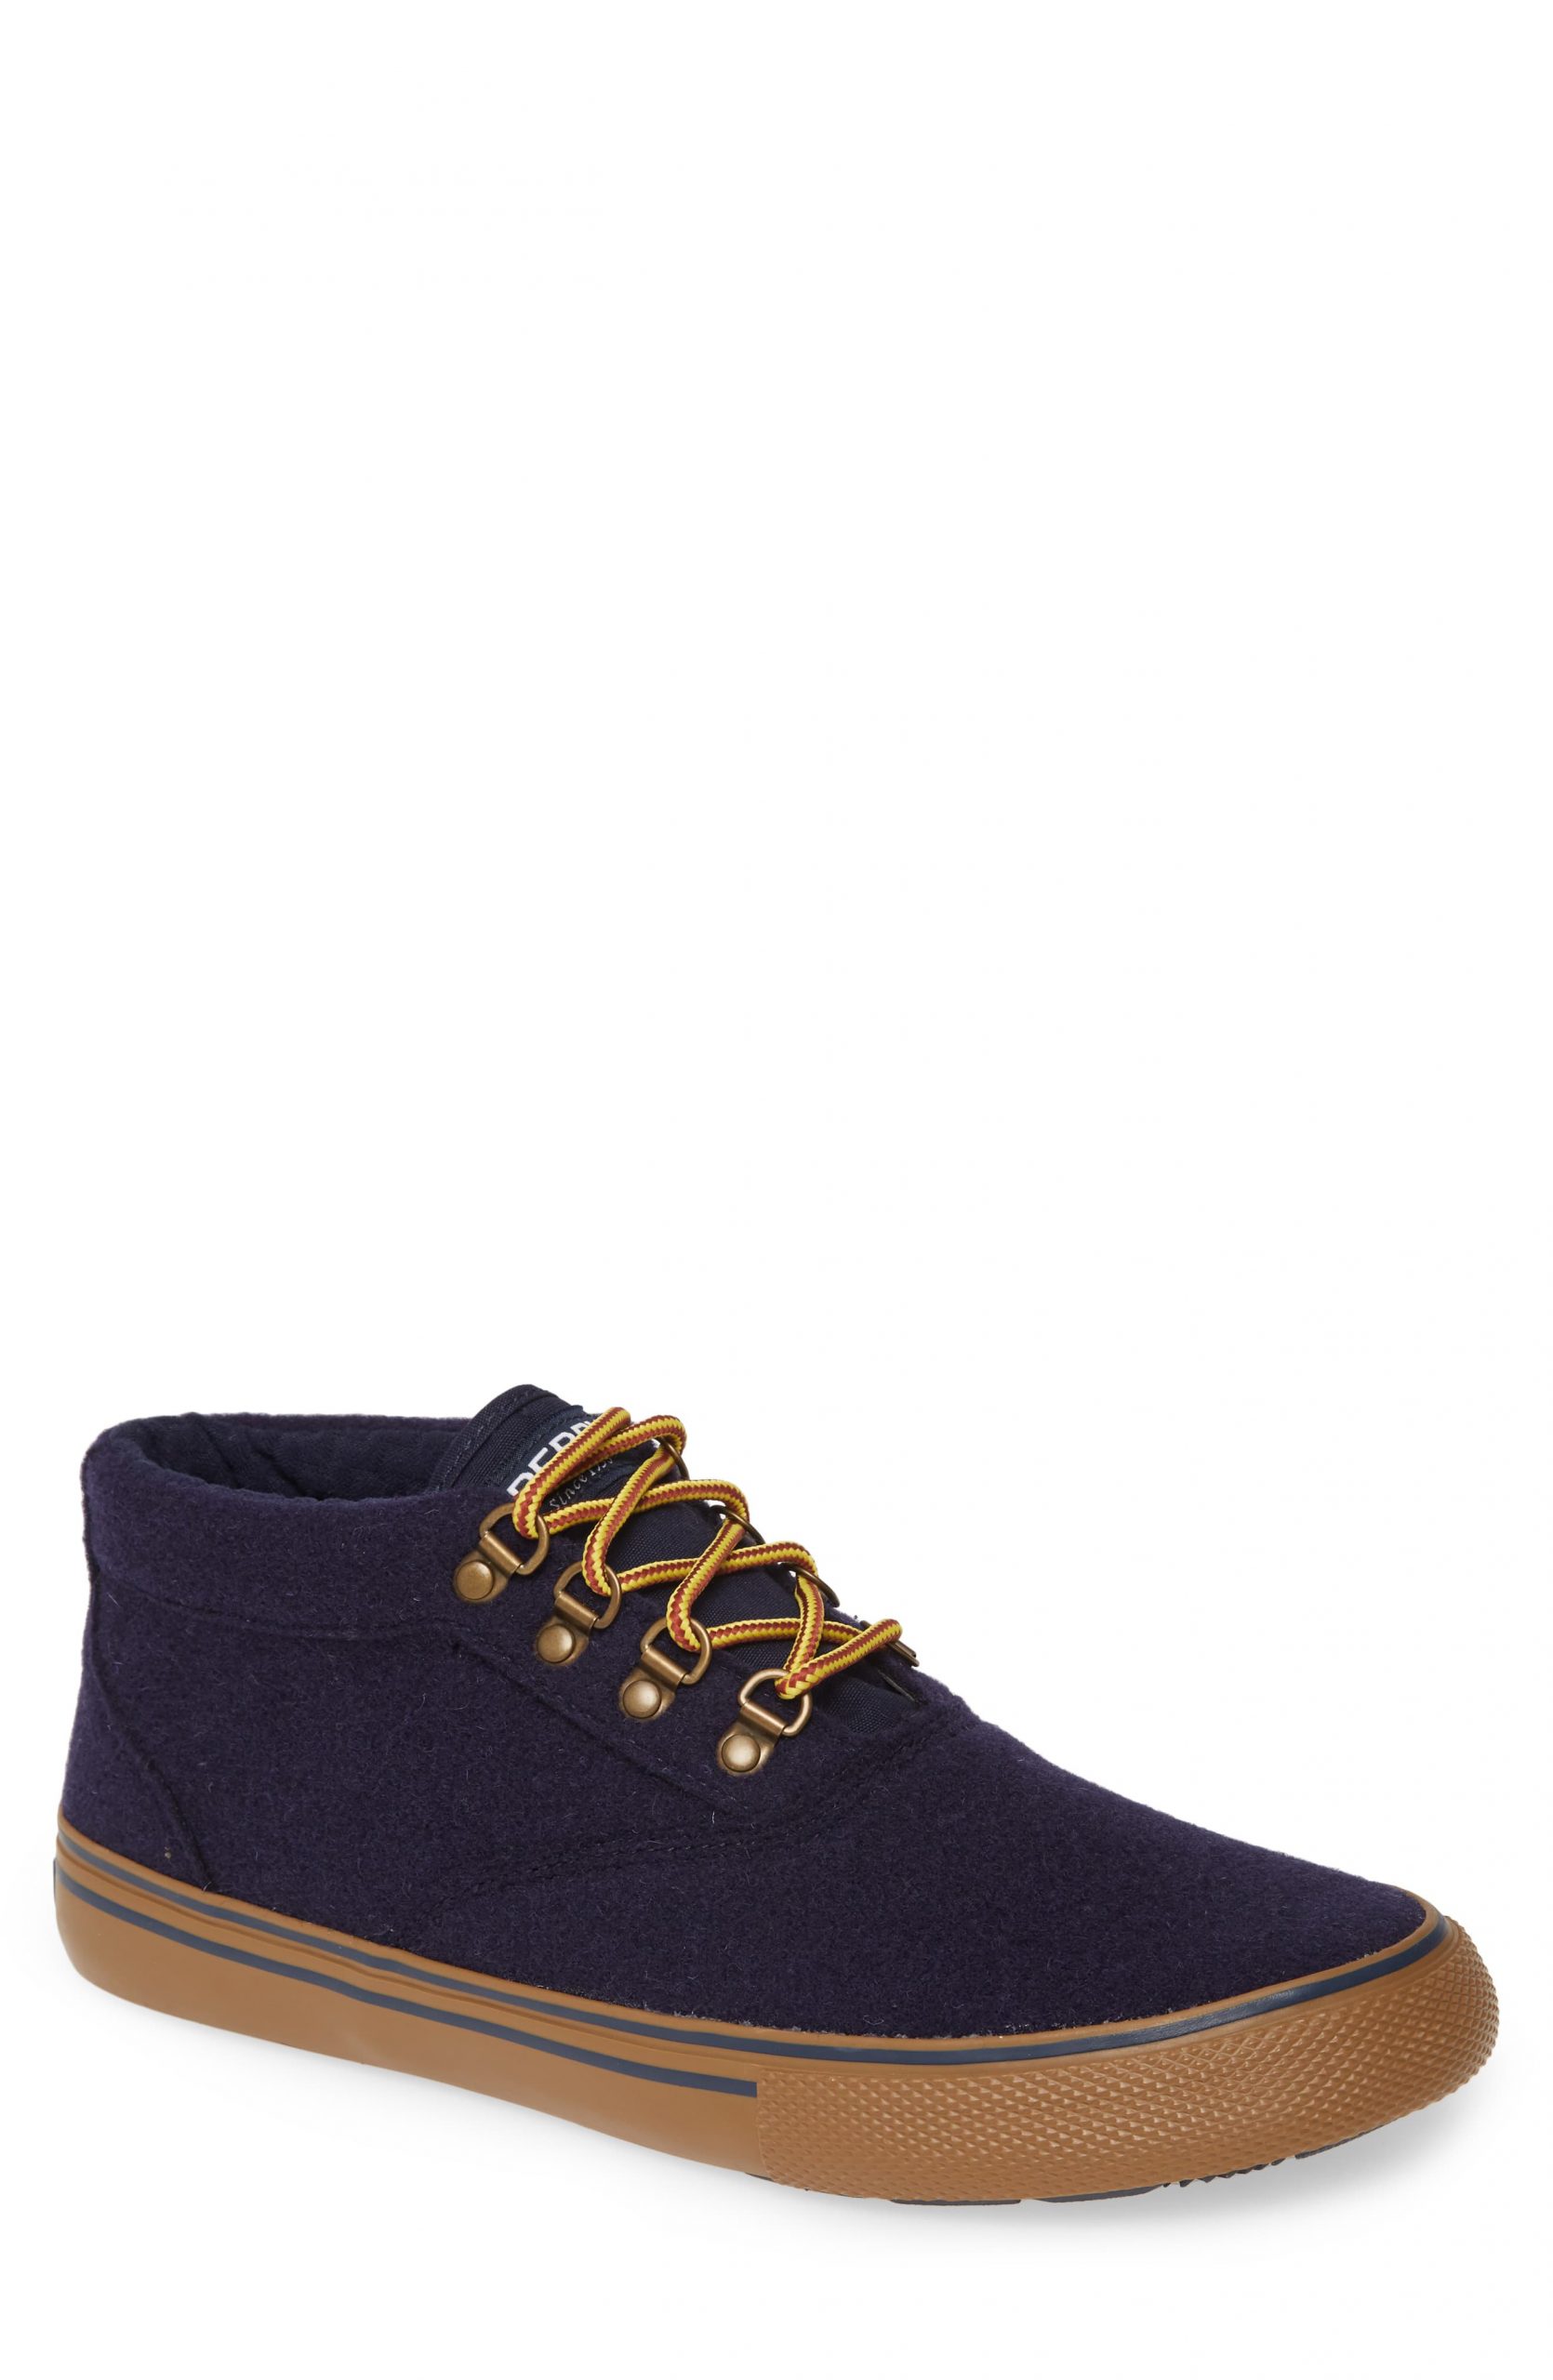 sperry storm boot